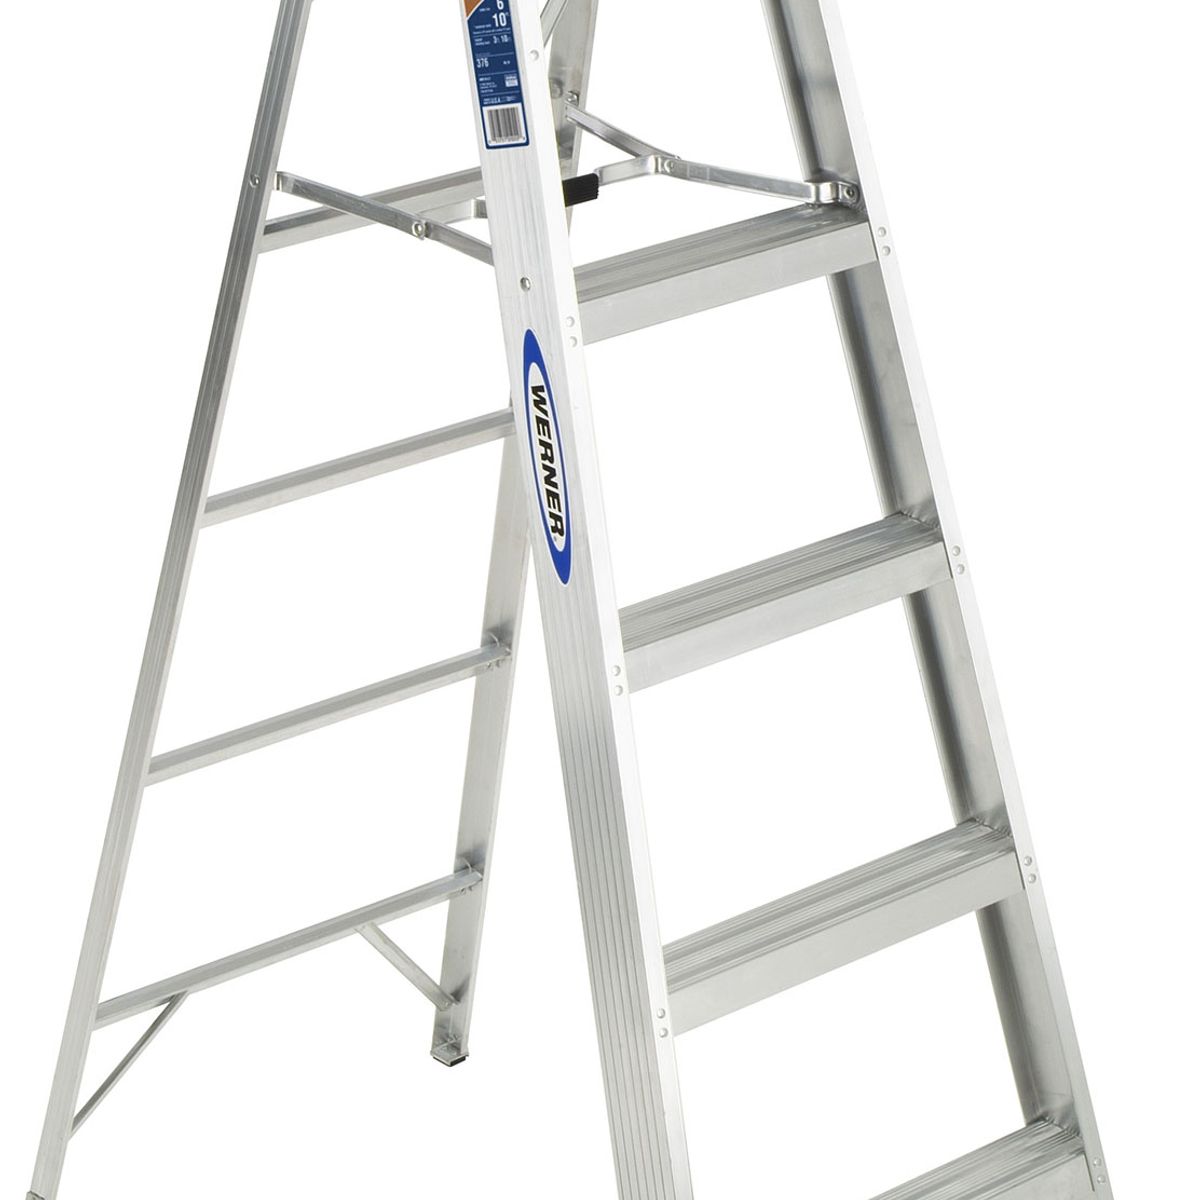 Details about   Werner 374 4 Ft Aluminum Stepladder Capacity 300 Lbs